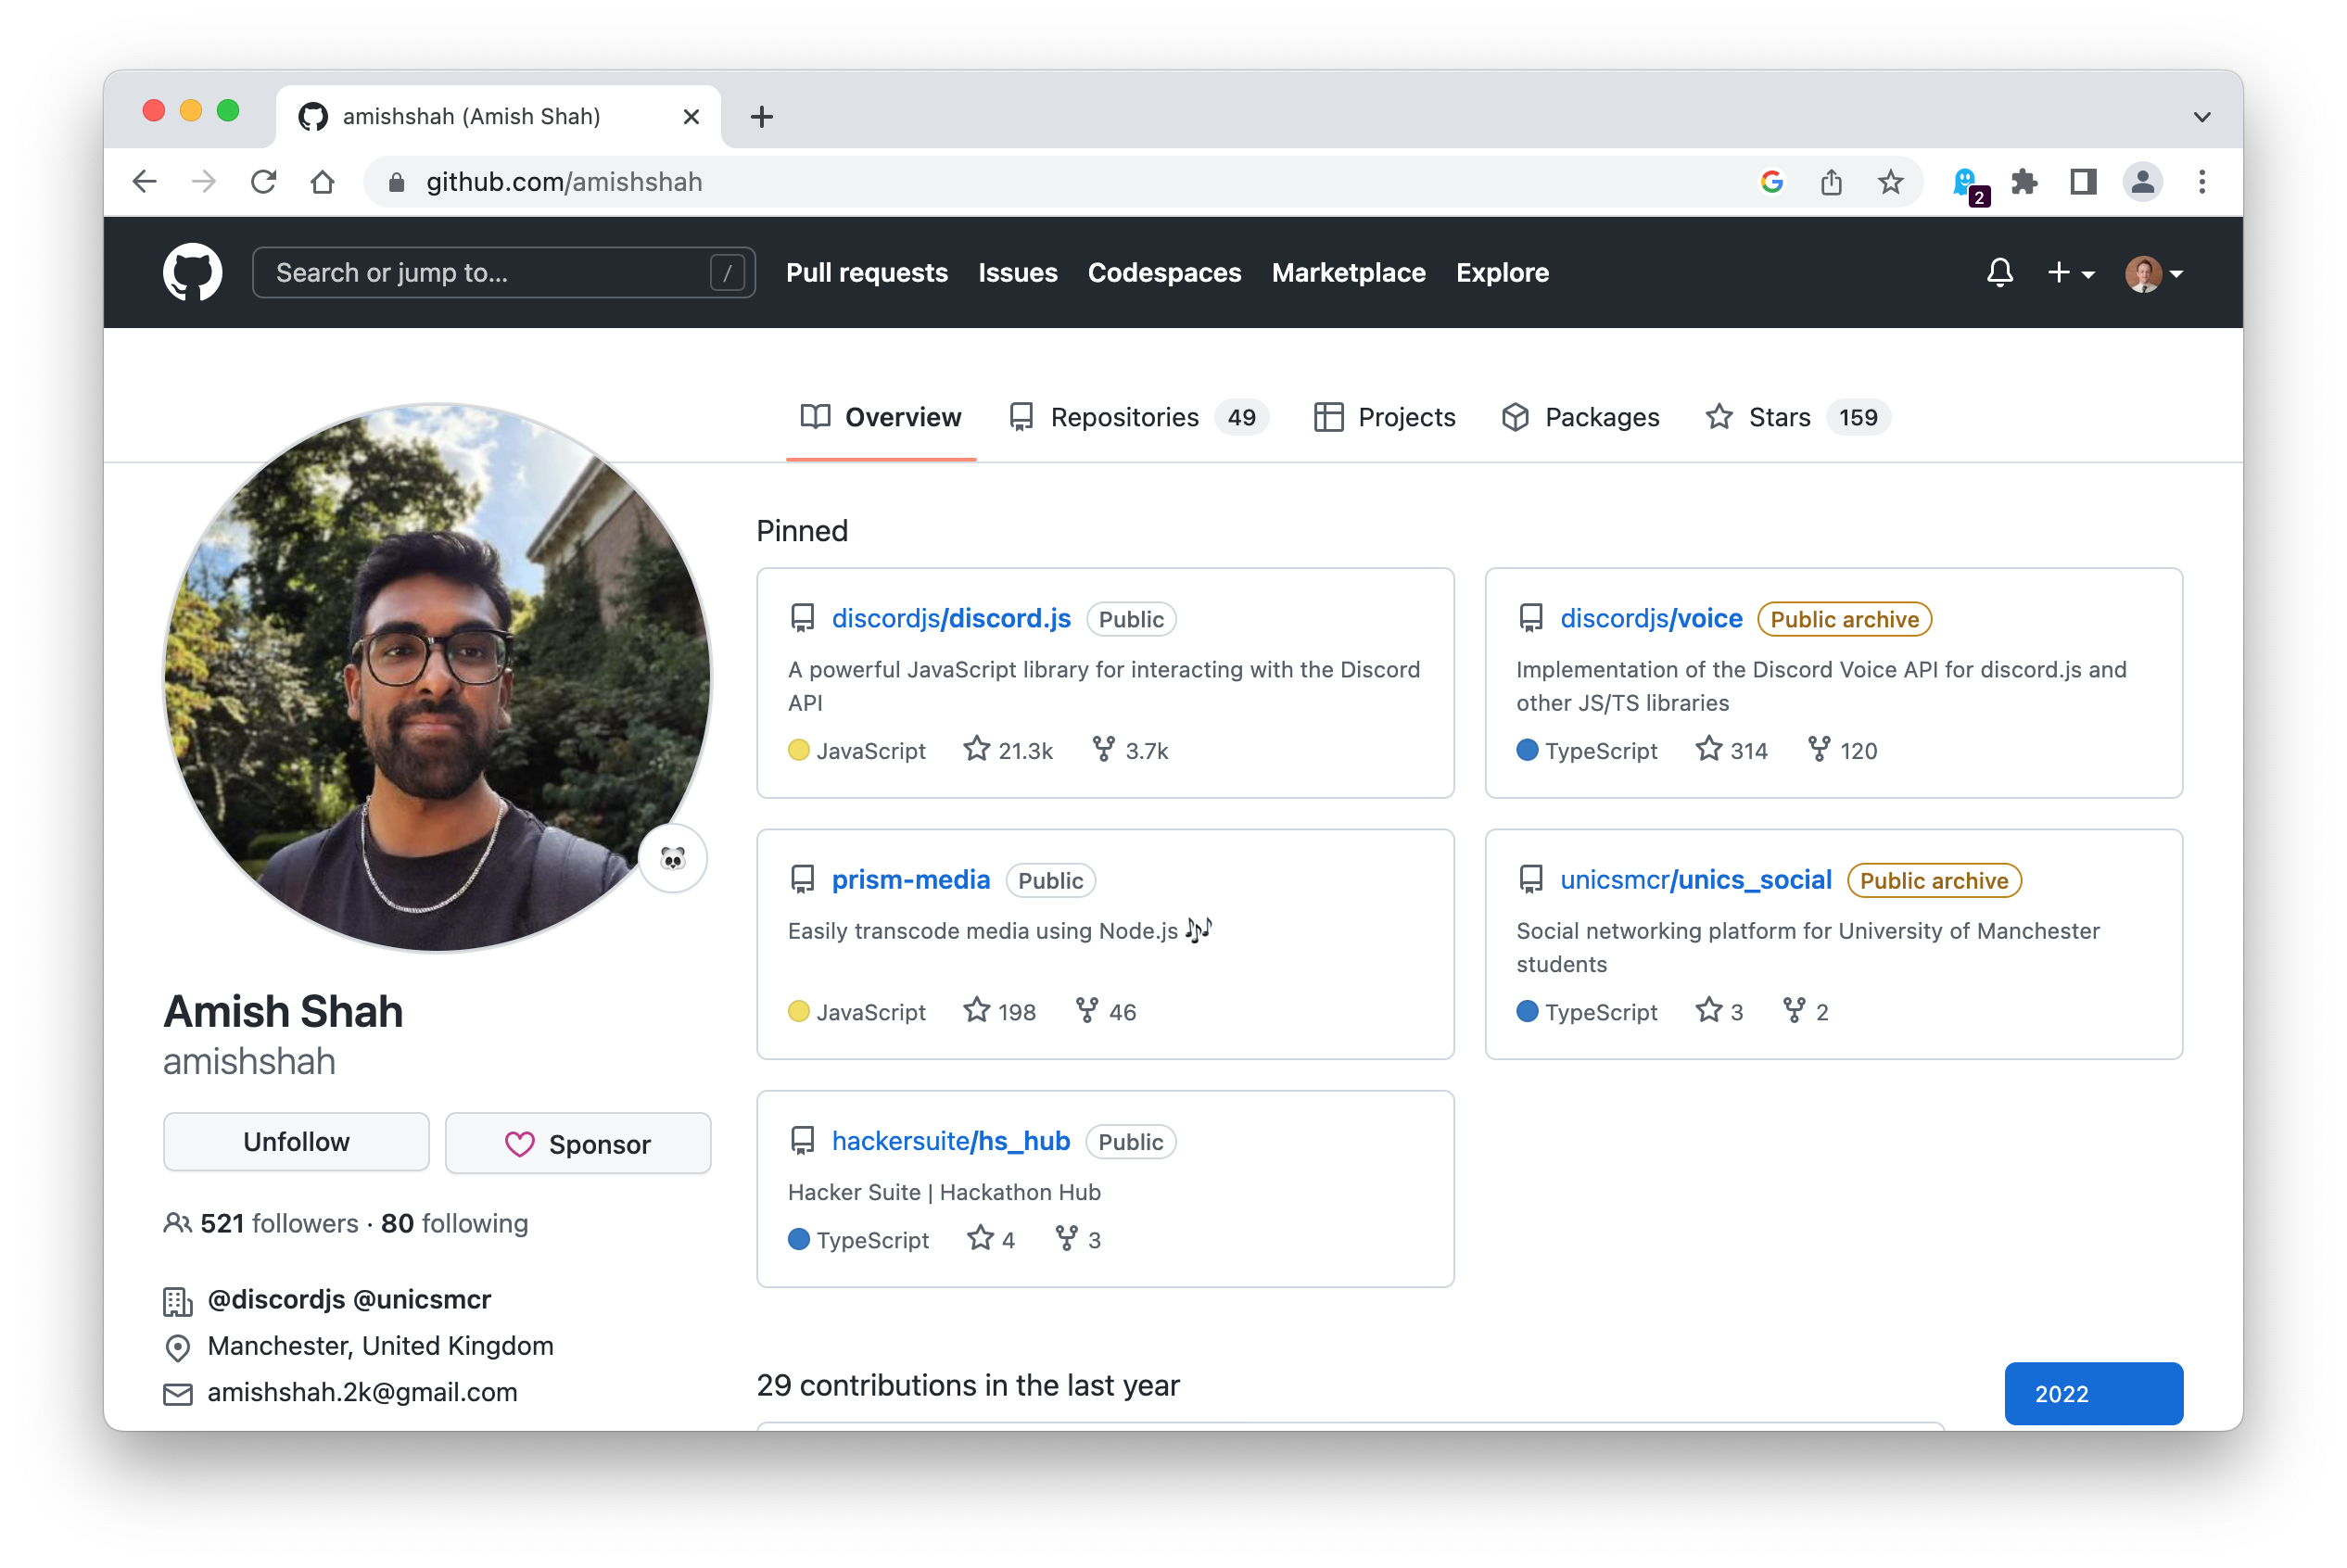 Github is commonly used to host open source software development projects. As of June 2022, GitHub reported having over 83 million developers and more than 200 million repositories, including at least 28 million public repositories. The screenshot shows a profile of Computer Science student Amish Shah: github.com/amishshah